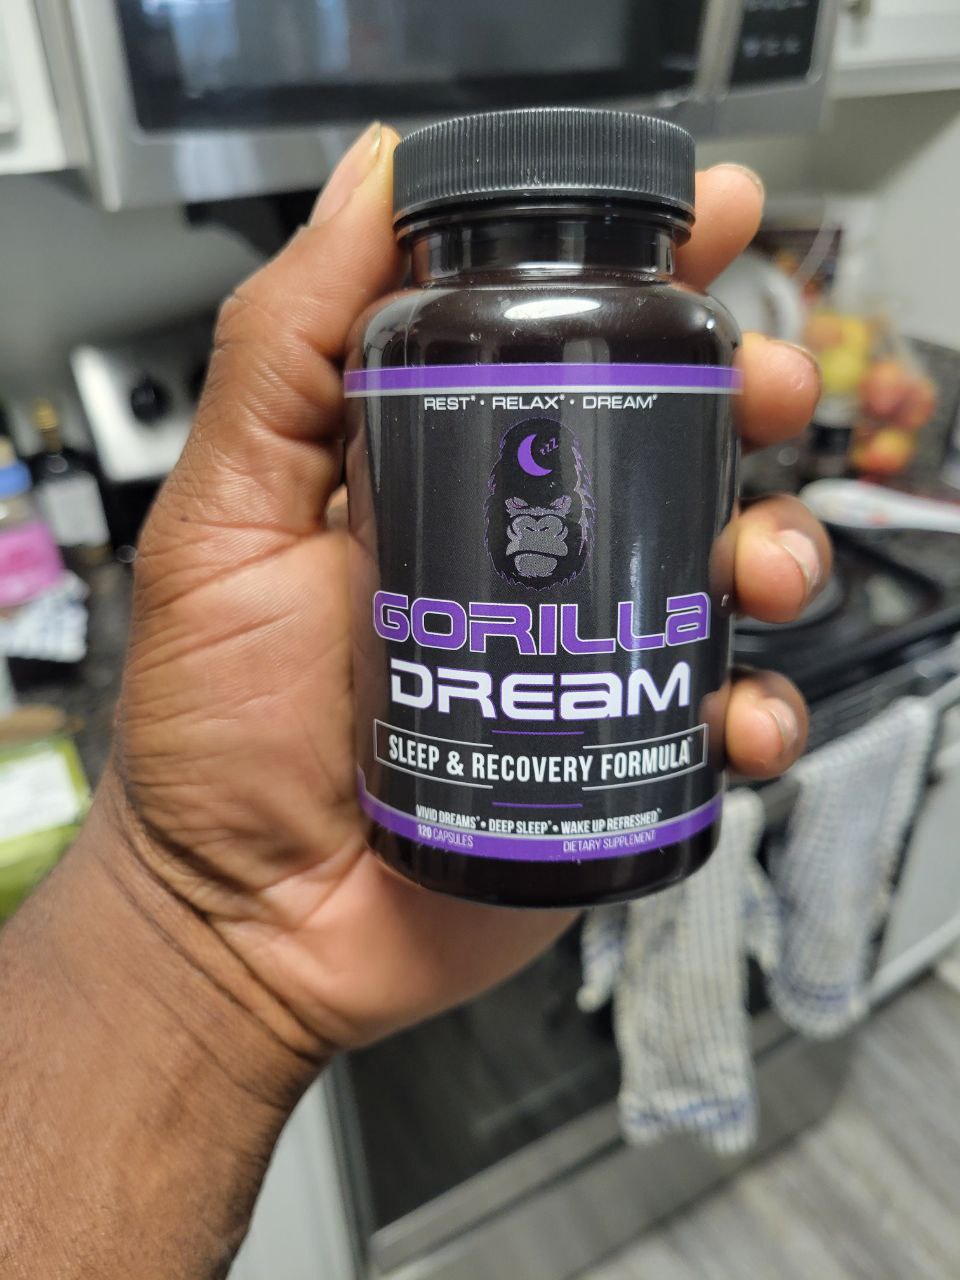 Gorilla Dream Review-My go-to sleep & recovery formula